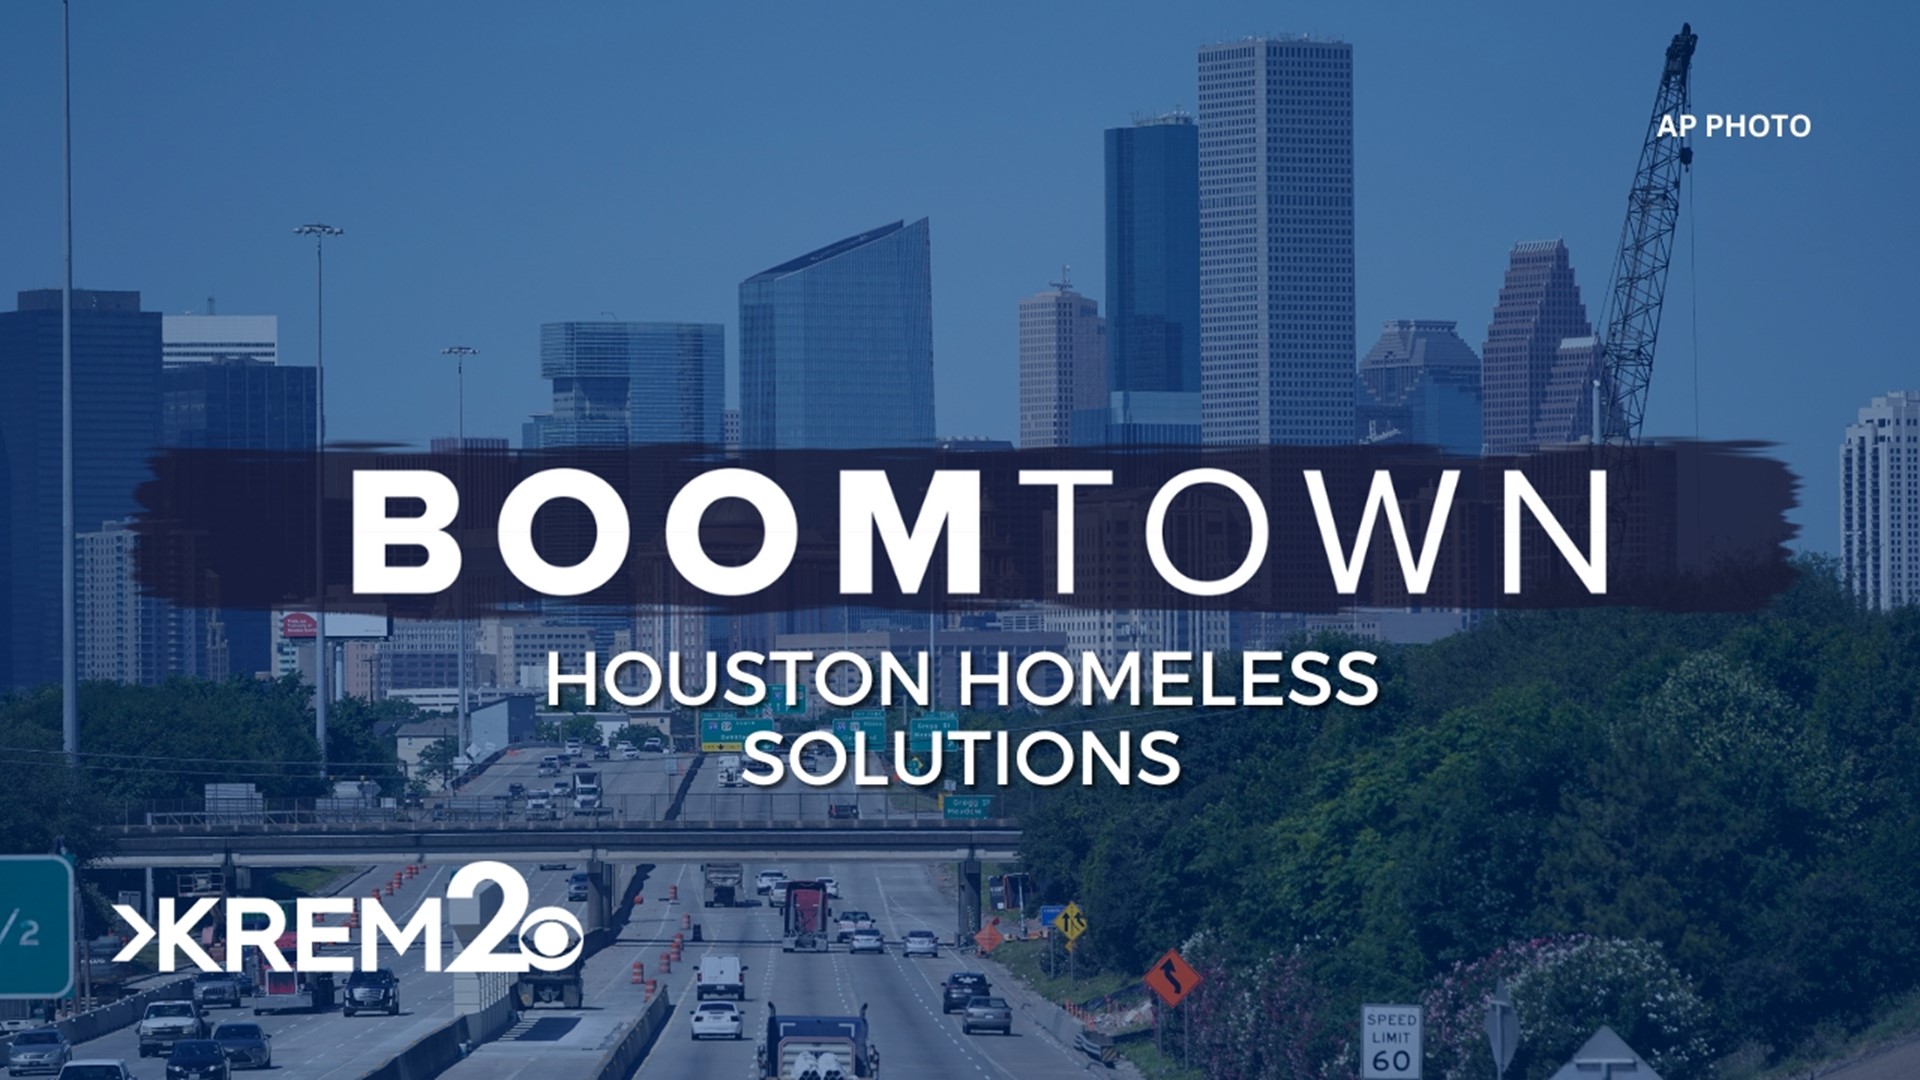 In the last 10 years, homelessness has dropped more than 60% in Houston, Texas, but has nearly doubled in Spokane. Why?